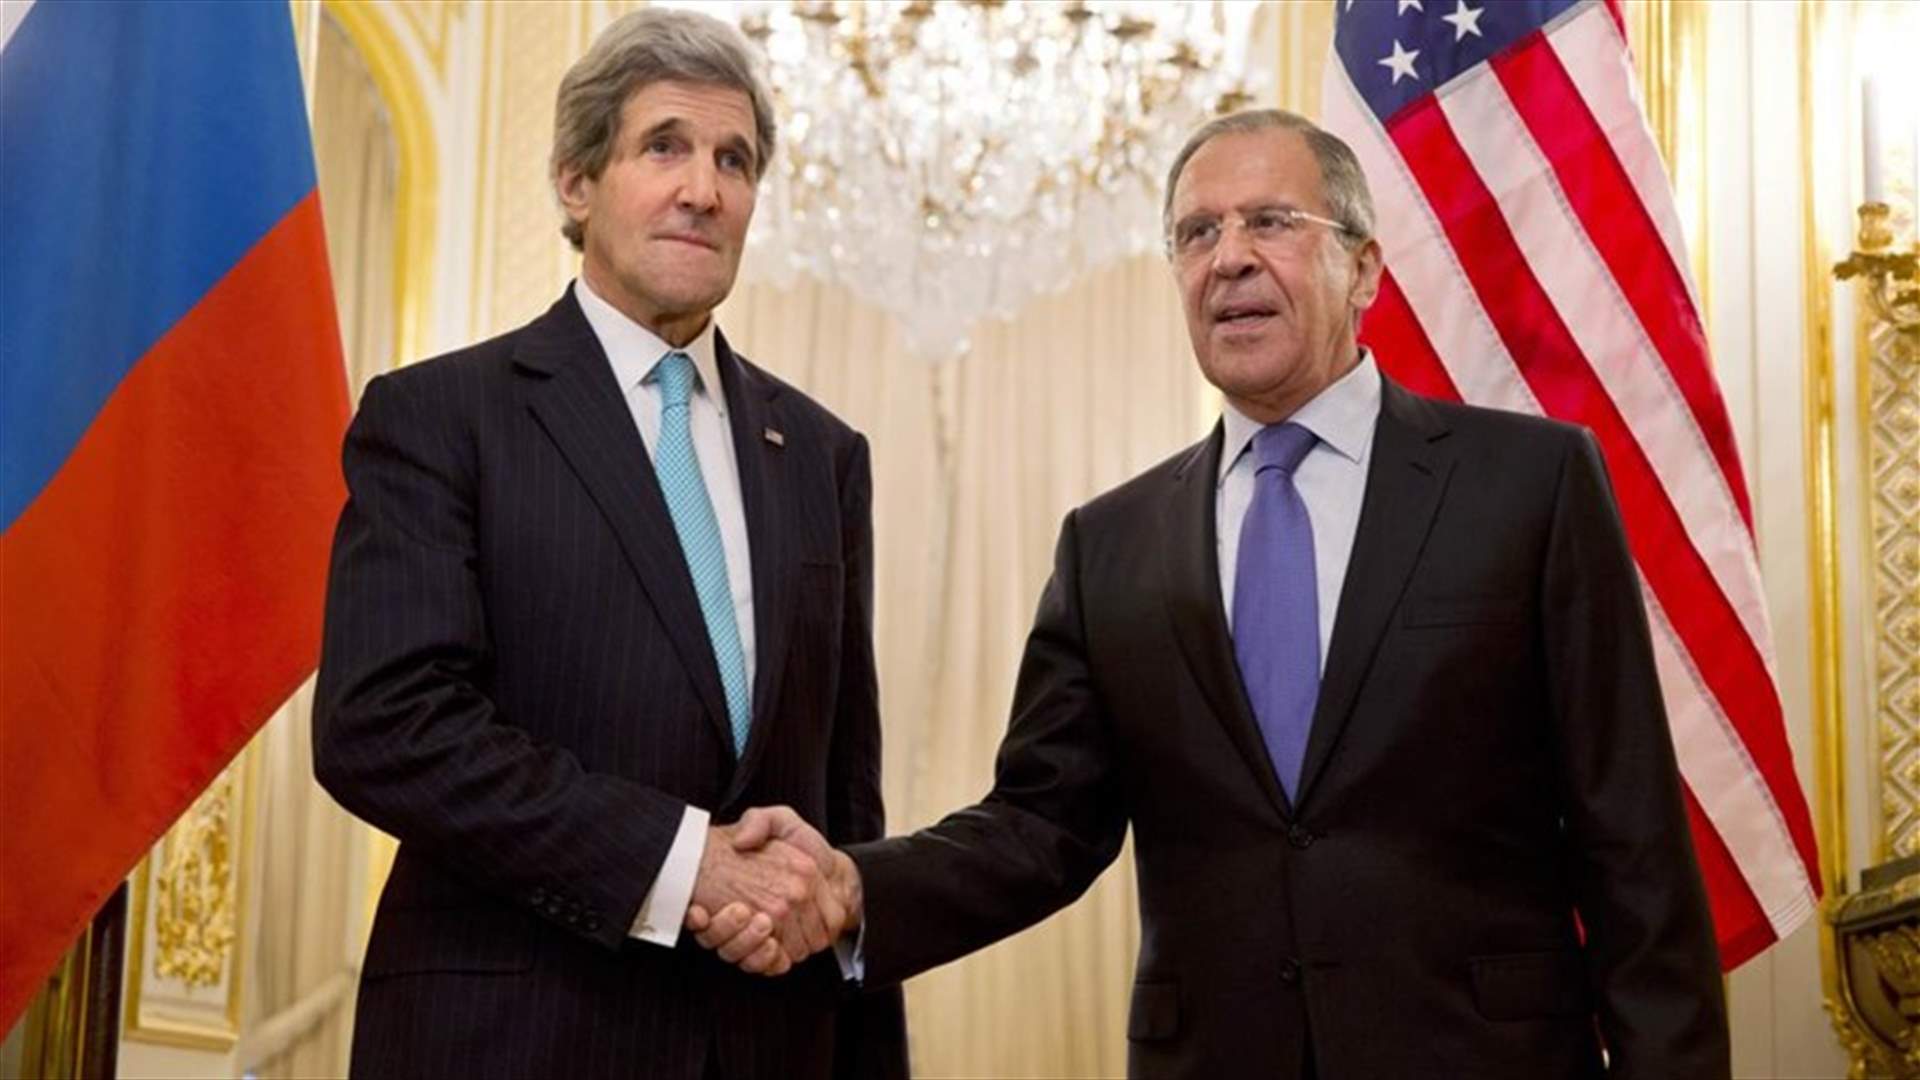 Kerry to meet Russia&#39;s Lavrov on Aug 26 to discuss Syria, Ukraine - U.S. official